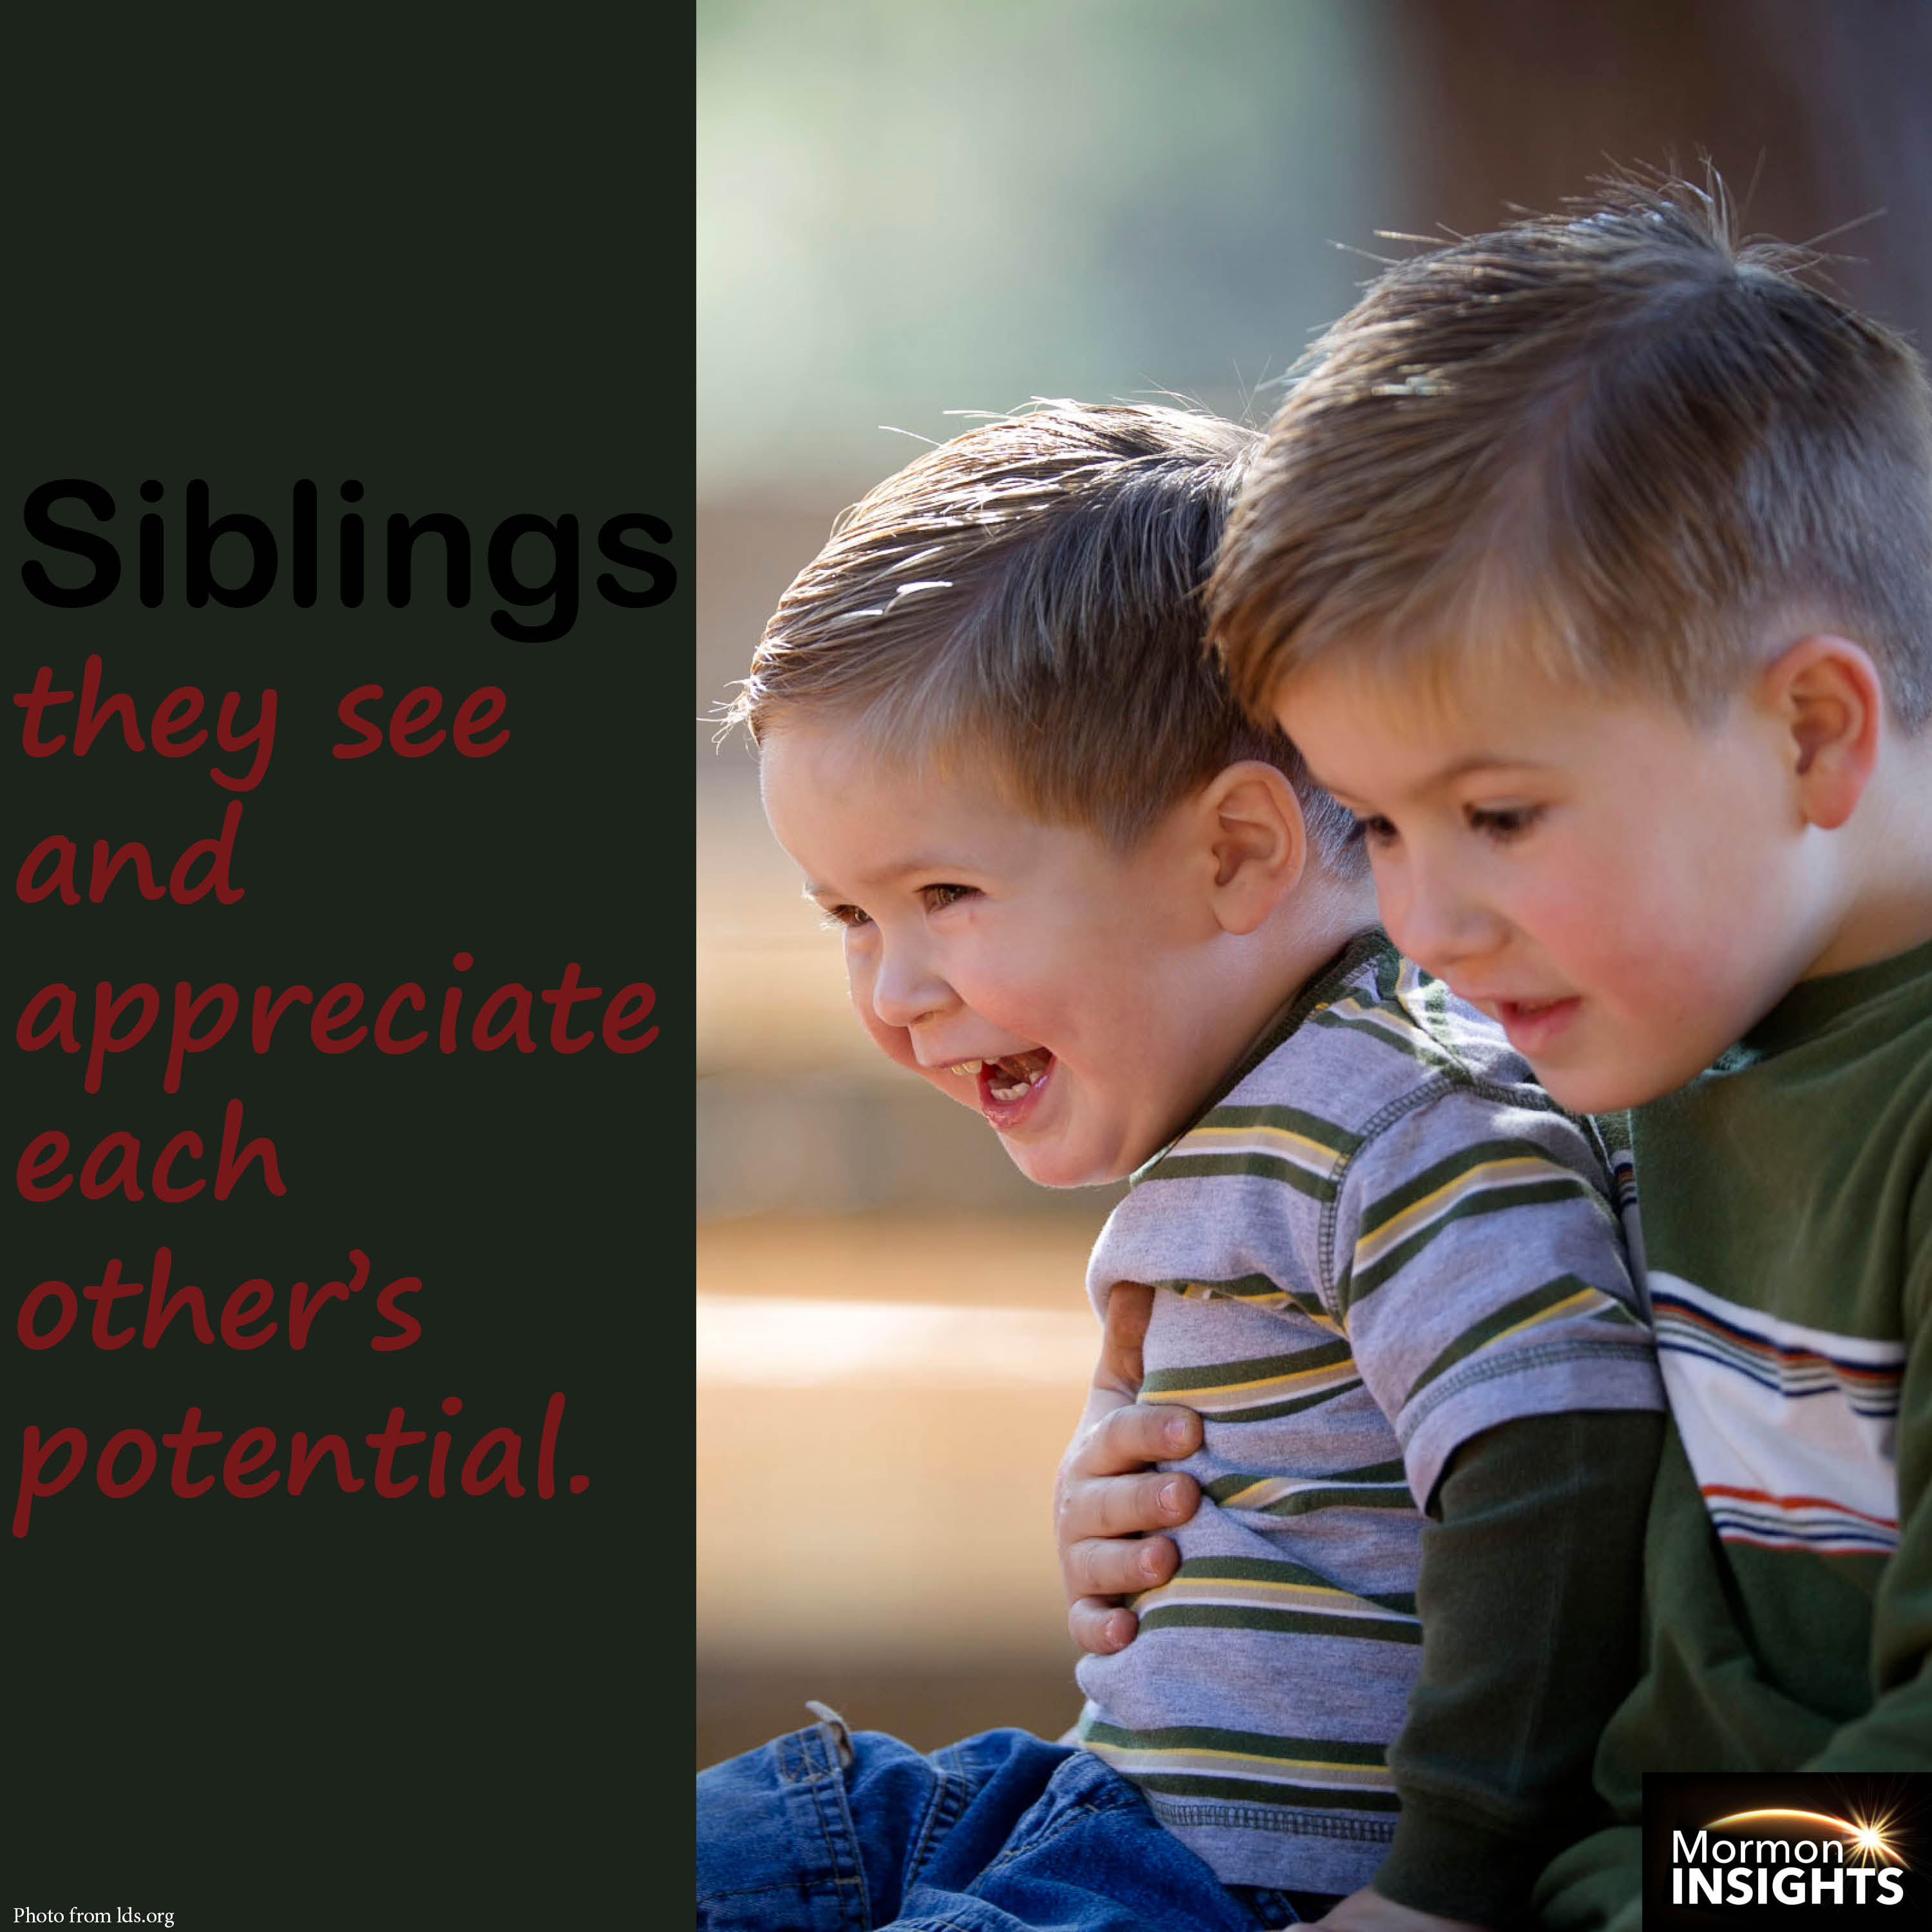 Siblings see each other's potential